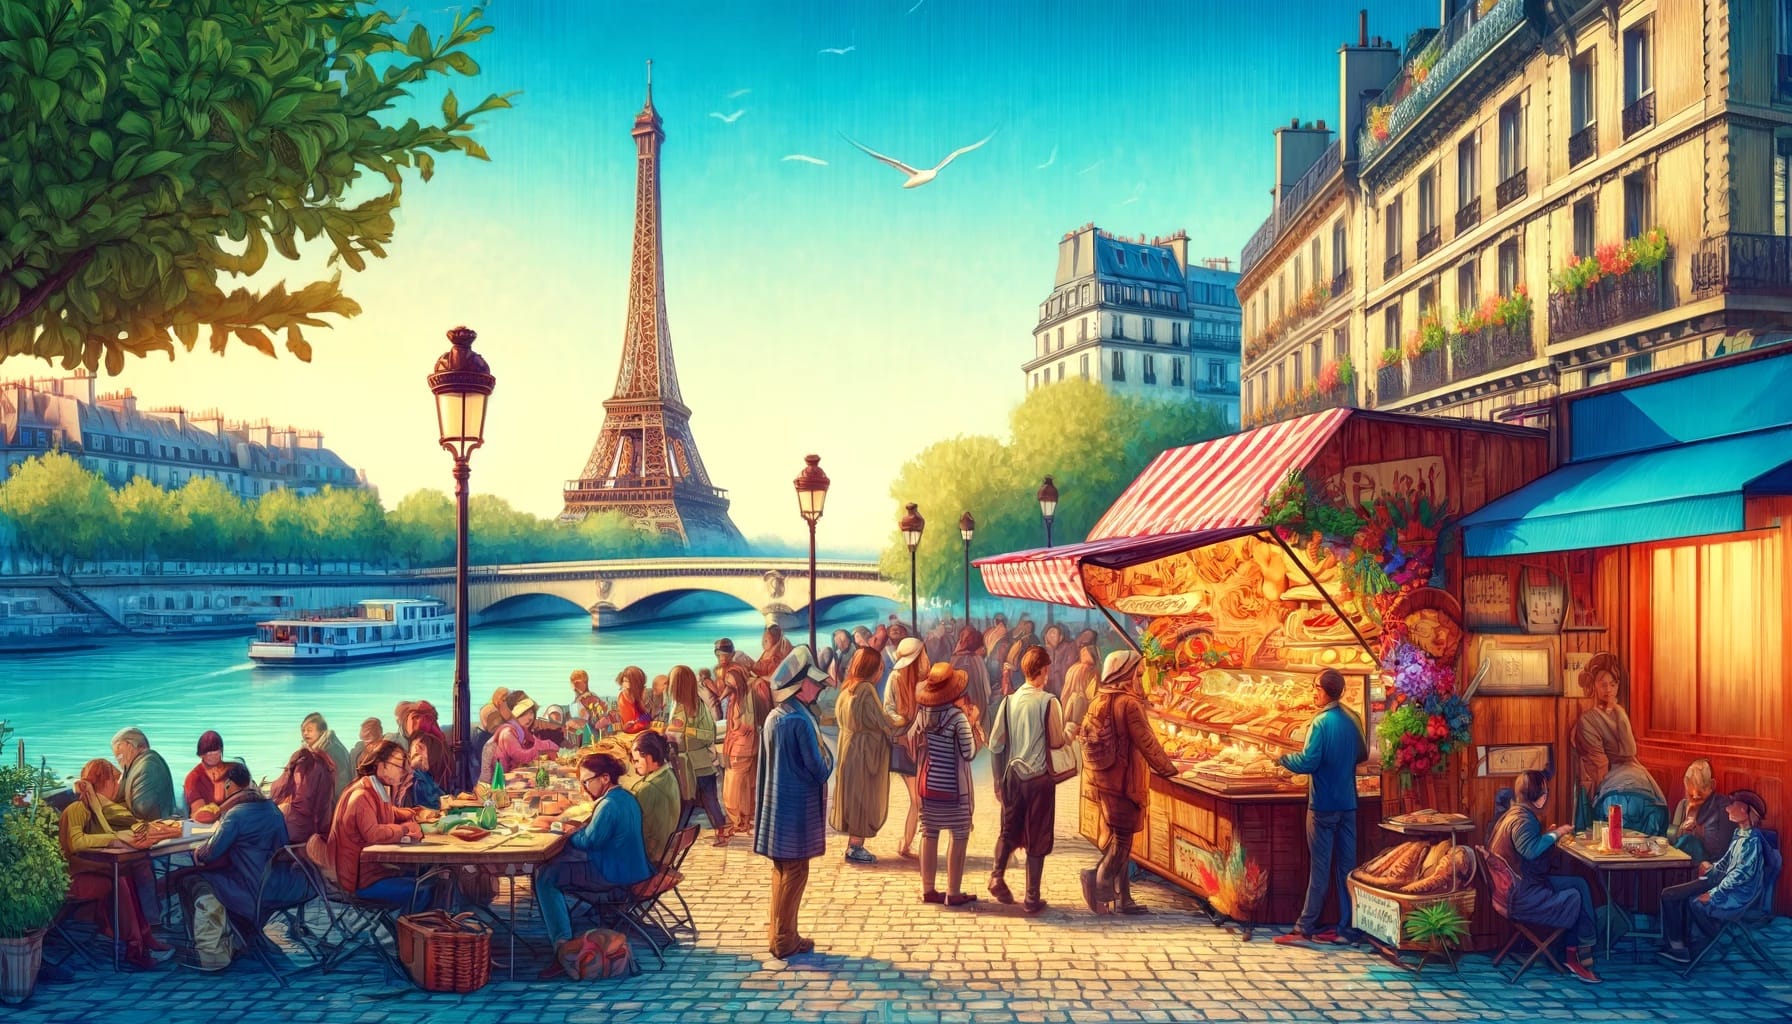 Vibrant street food market scene in Paris with a diverse group enjoying local culinary delights, set against the backdrop of the iconic Eiffel Tower, perfect for promoting Paris food tours.